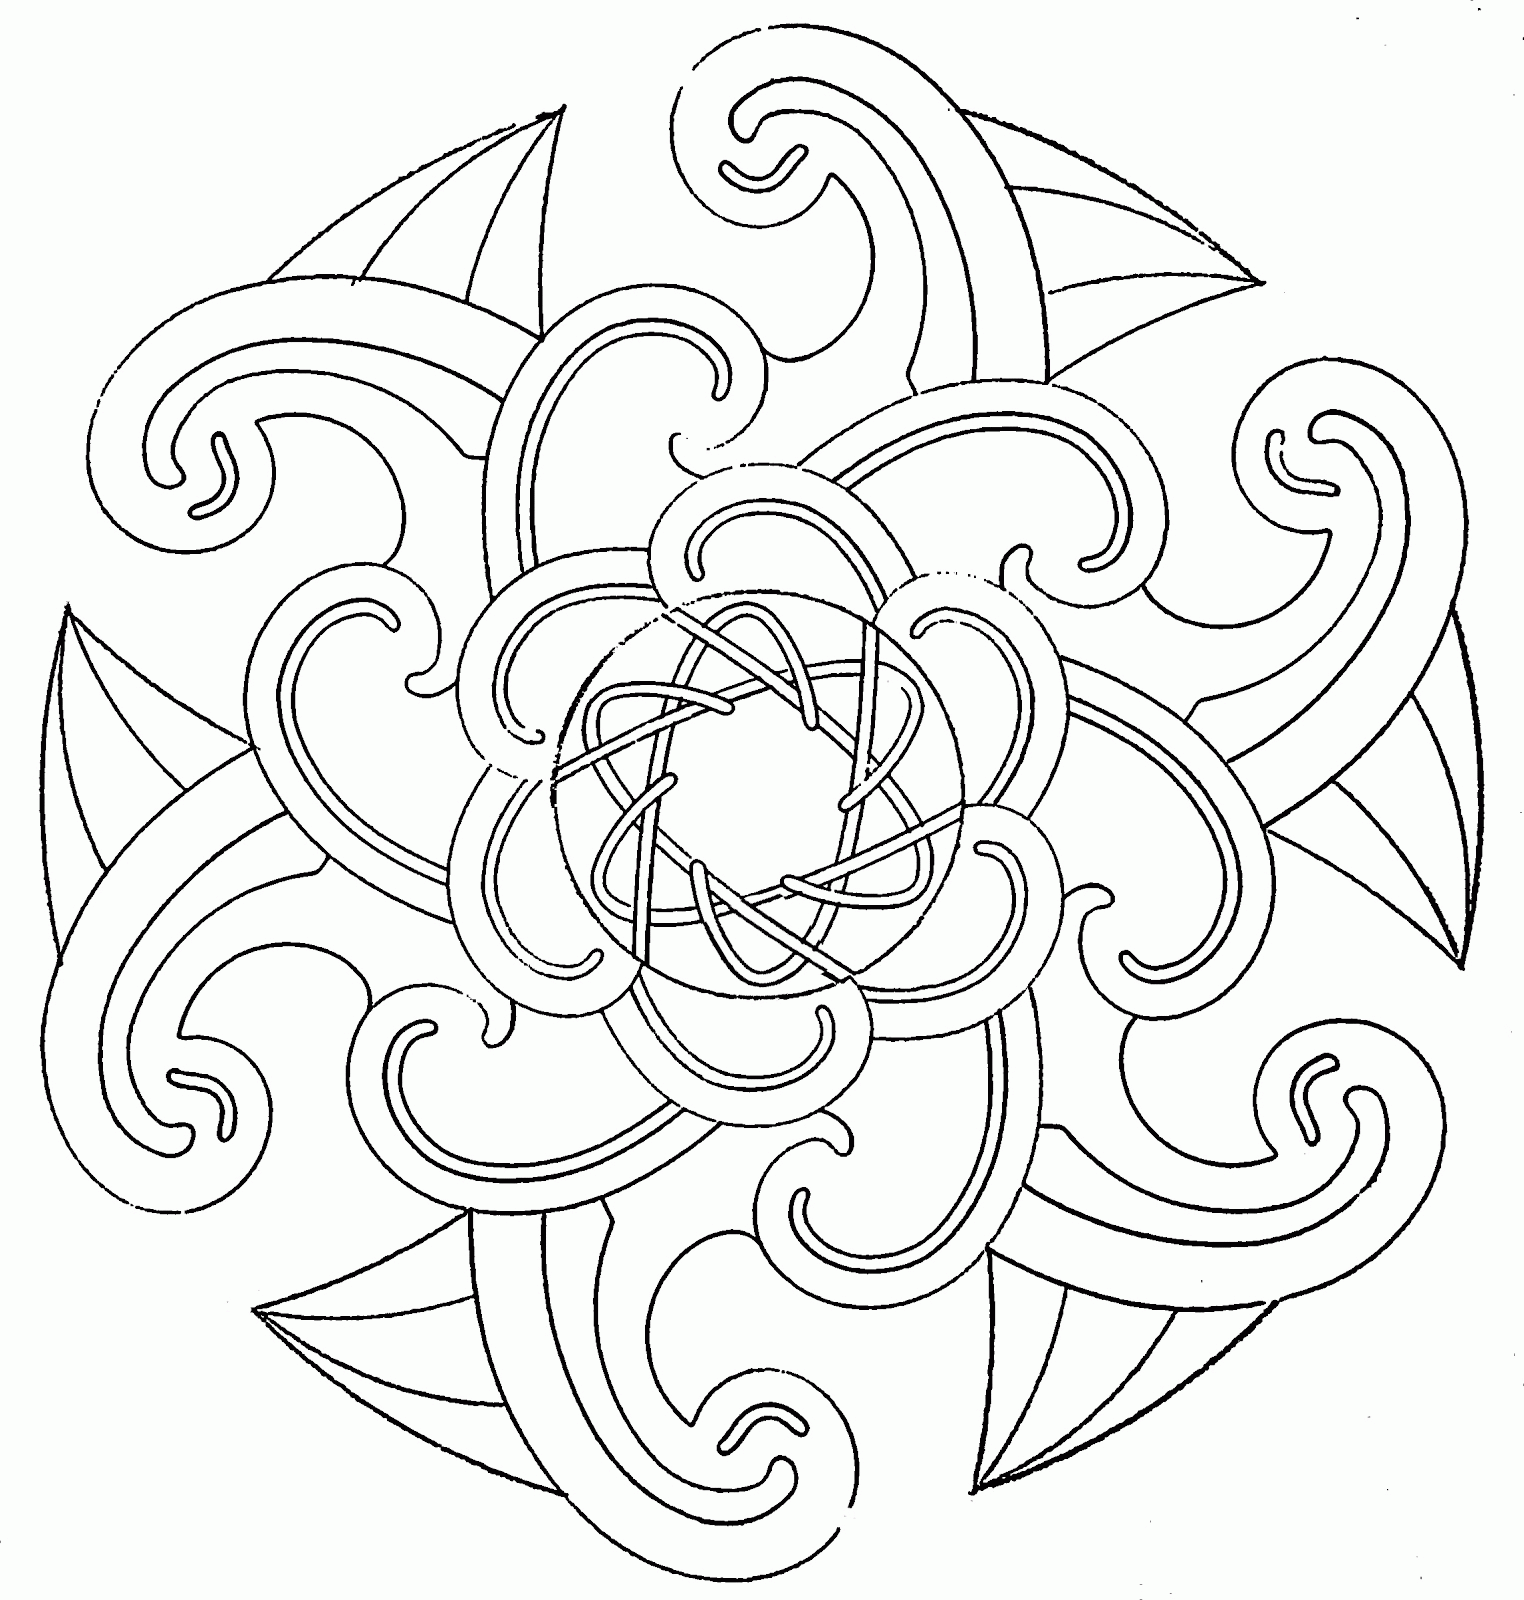 Printable Cool Coloring Pages Designs   Coloring Home